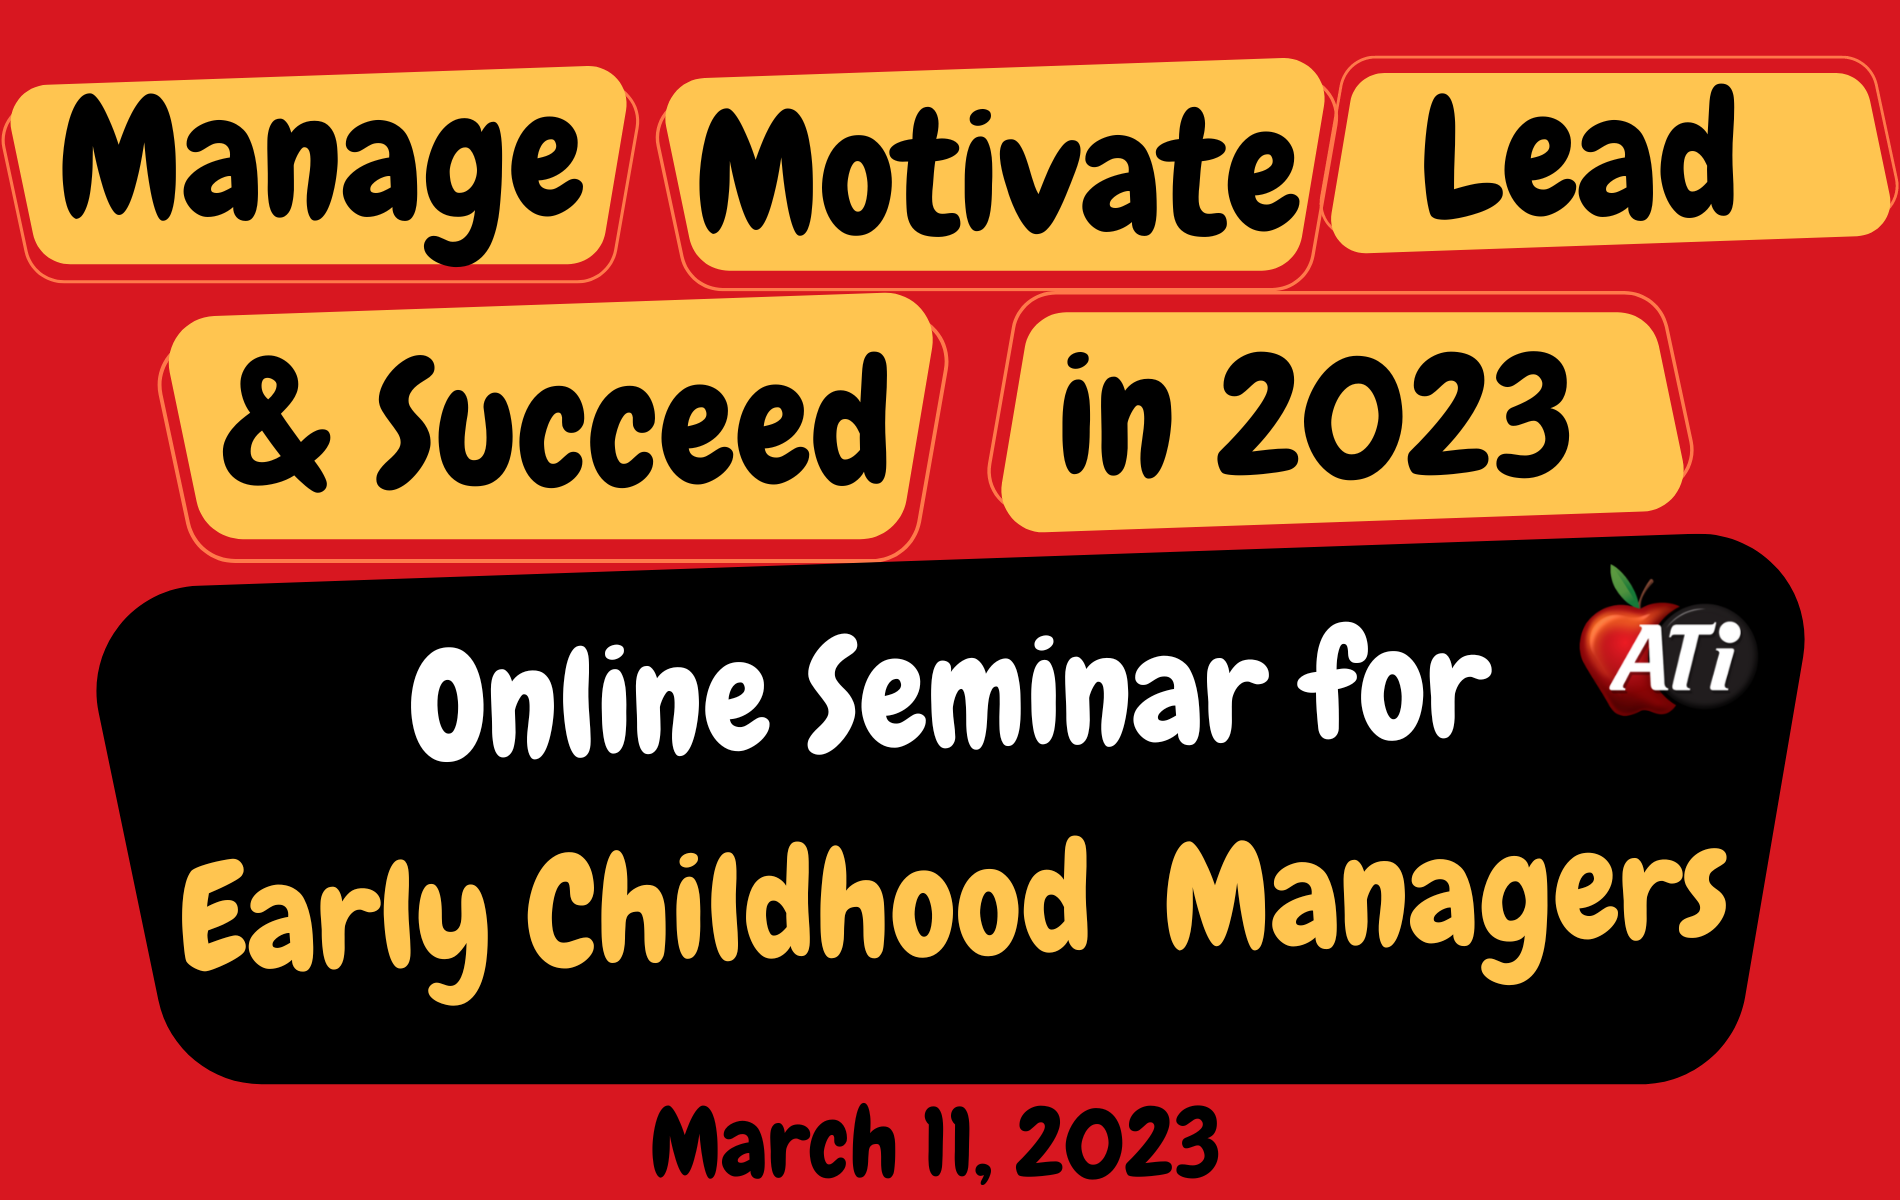 ATI's graphic Mange Motivate Lead Child Care Managers Online